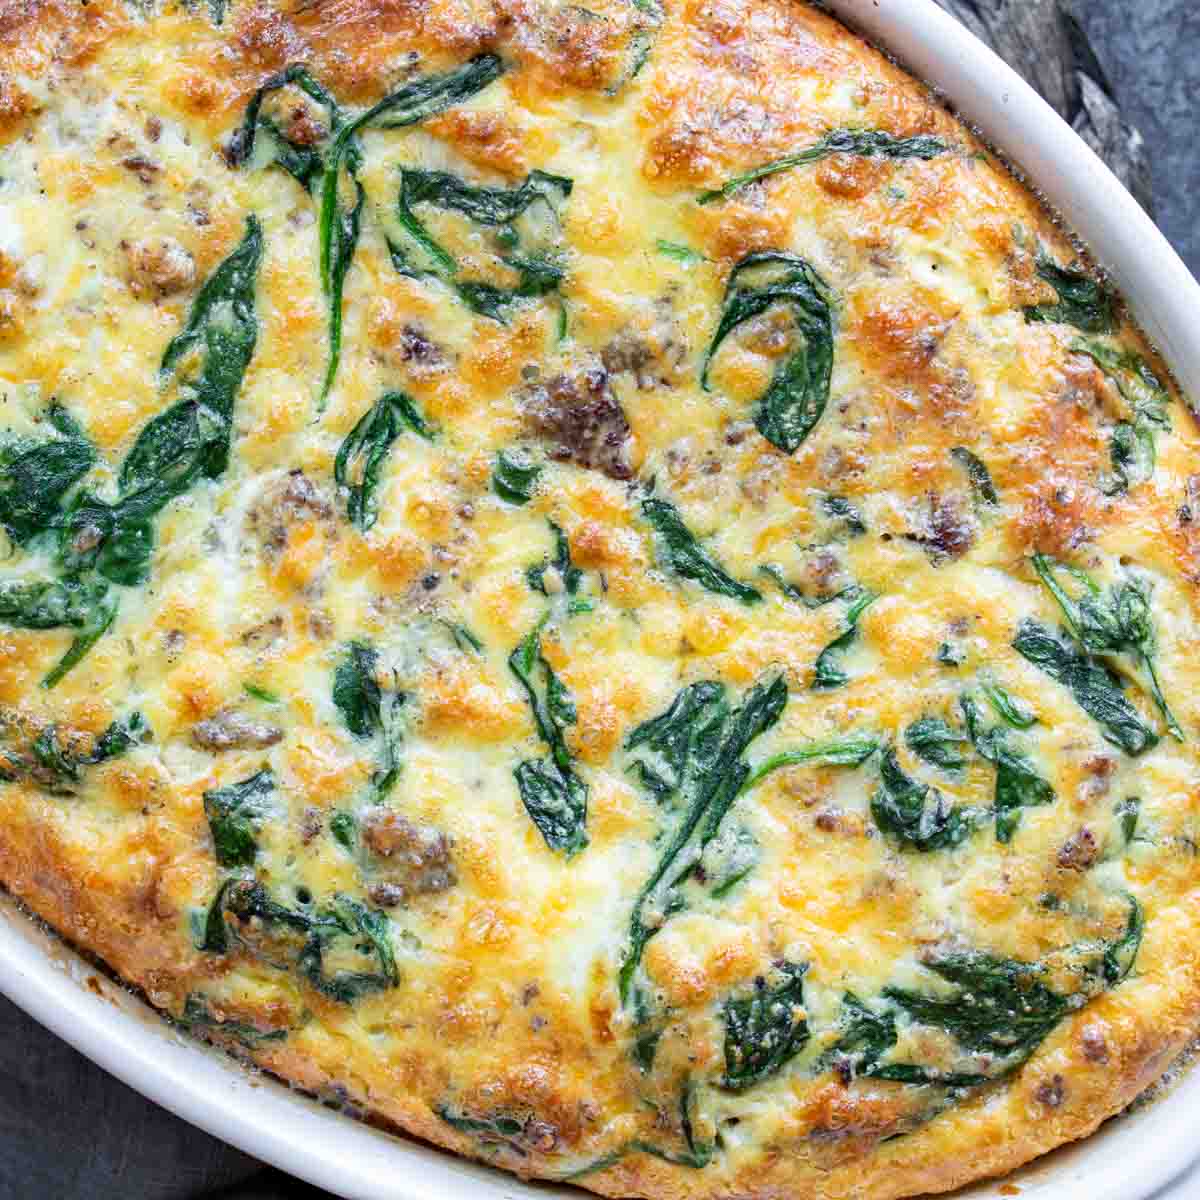 Freshly baked Spinach and Sausage Quiche in a white dish.